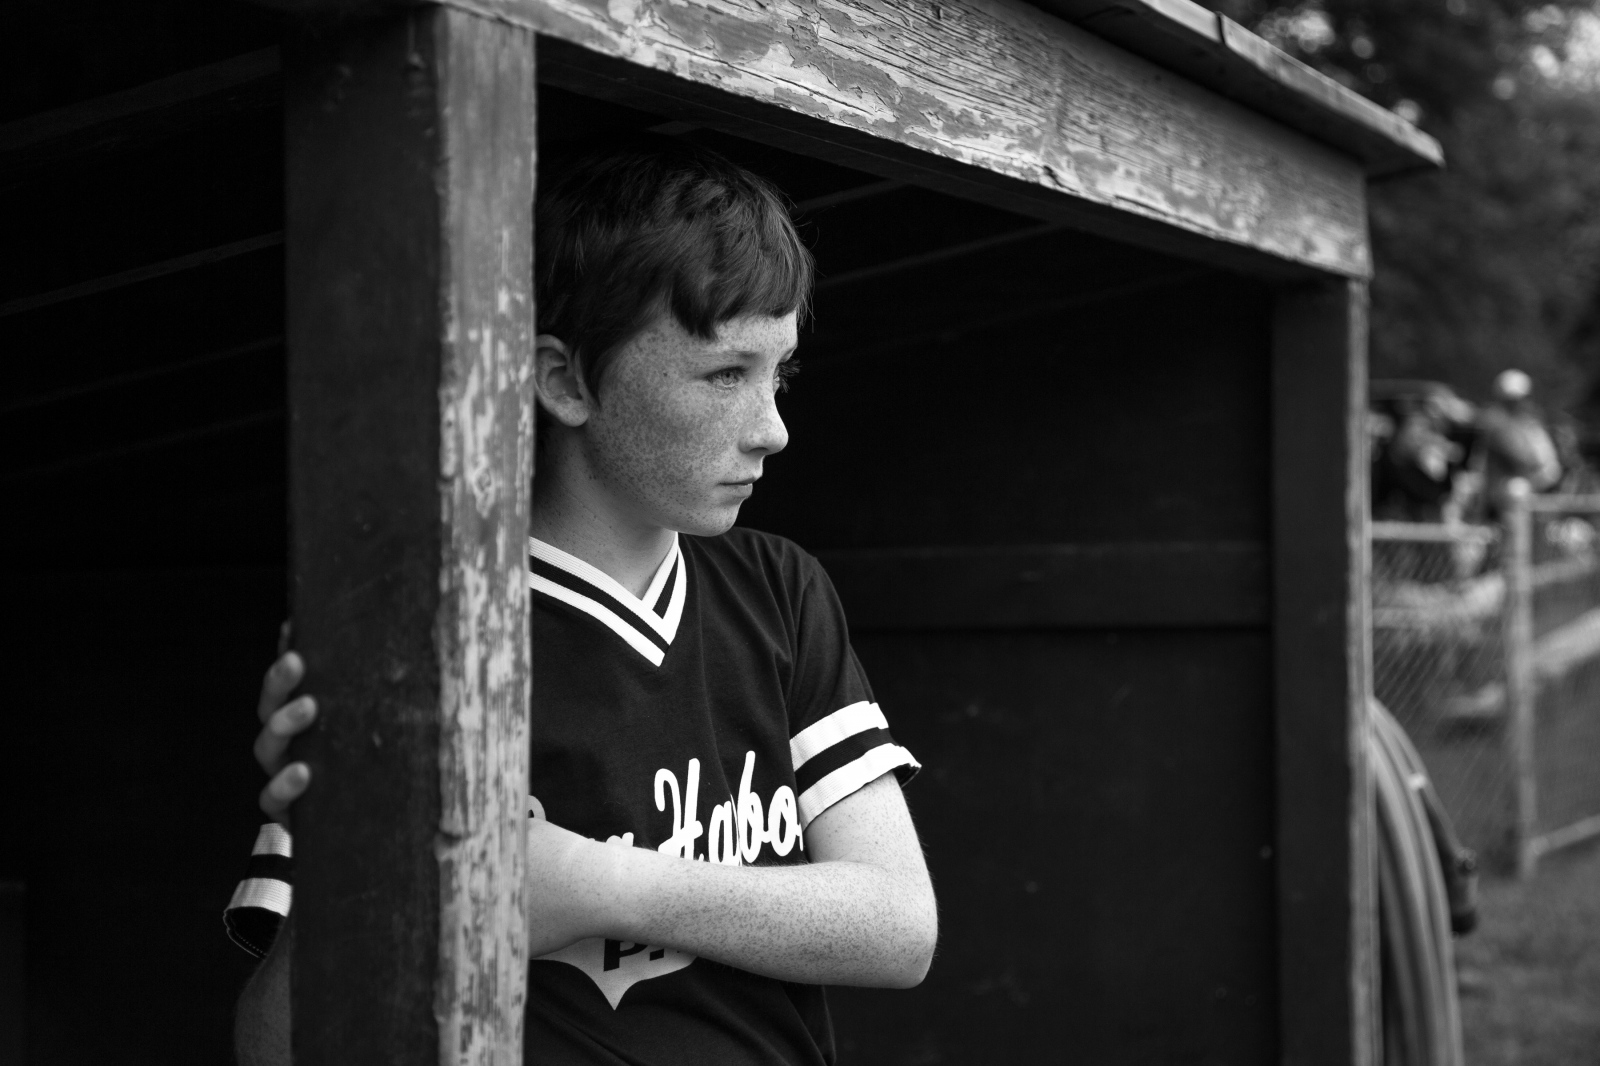 This Timeless Game - Children participating in youth baseball on Long Island, NY.